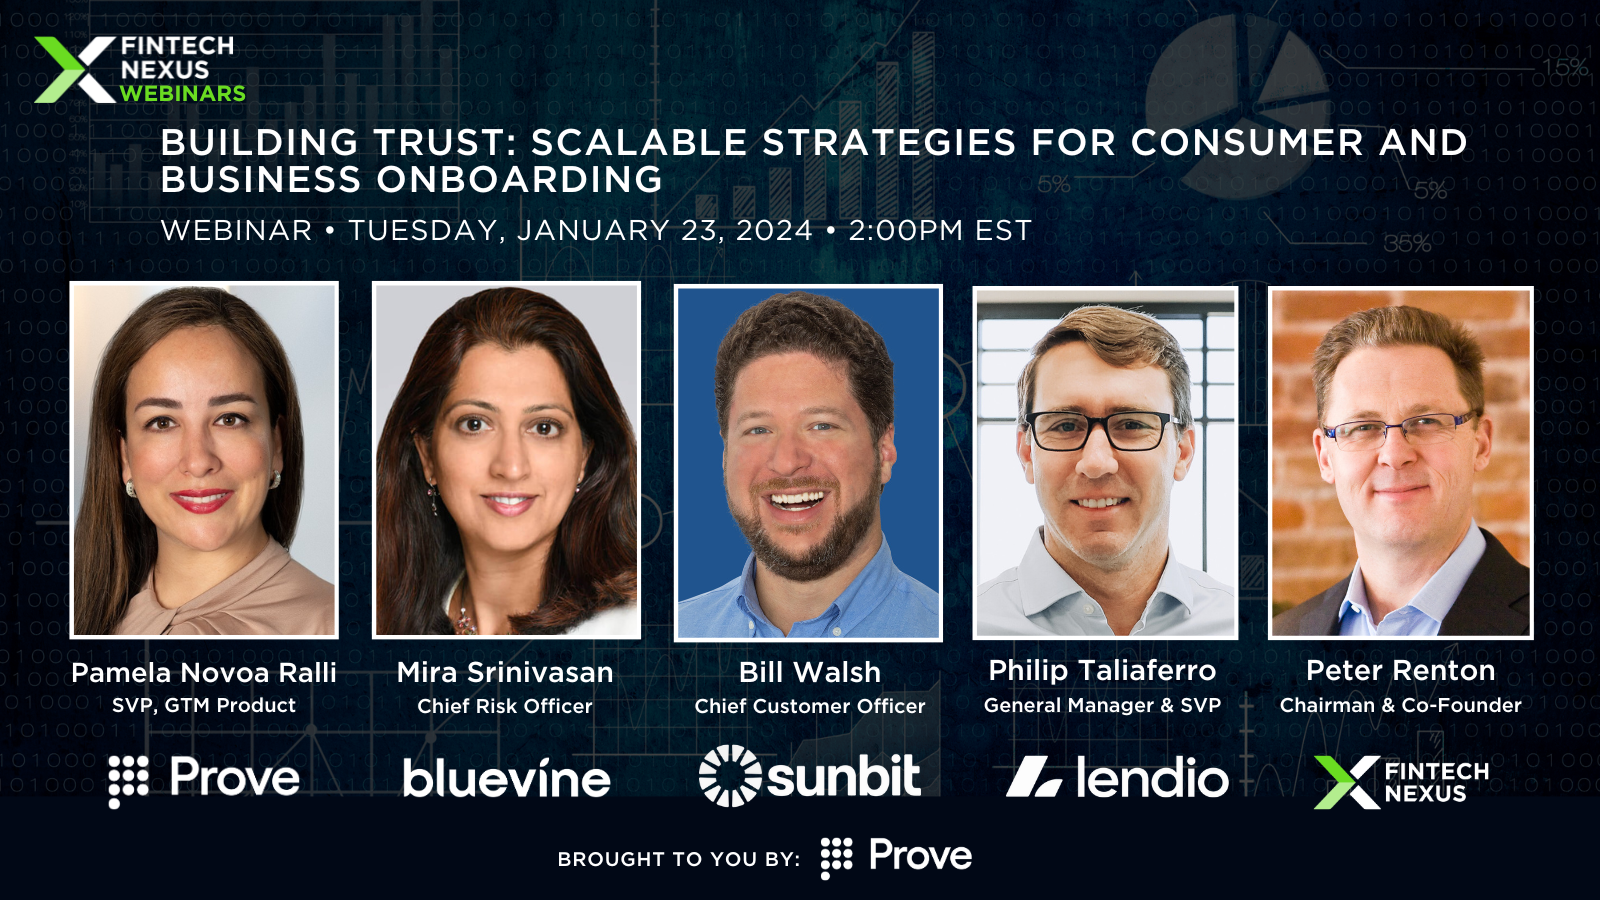 Building Trust: Scalable Strategies for Consumer and Business Onboarding